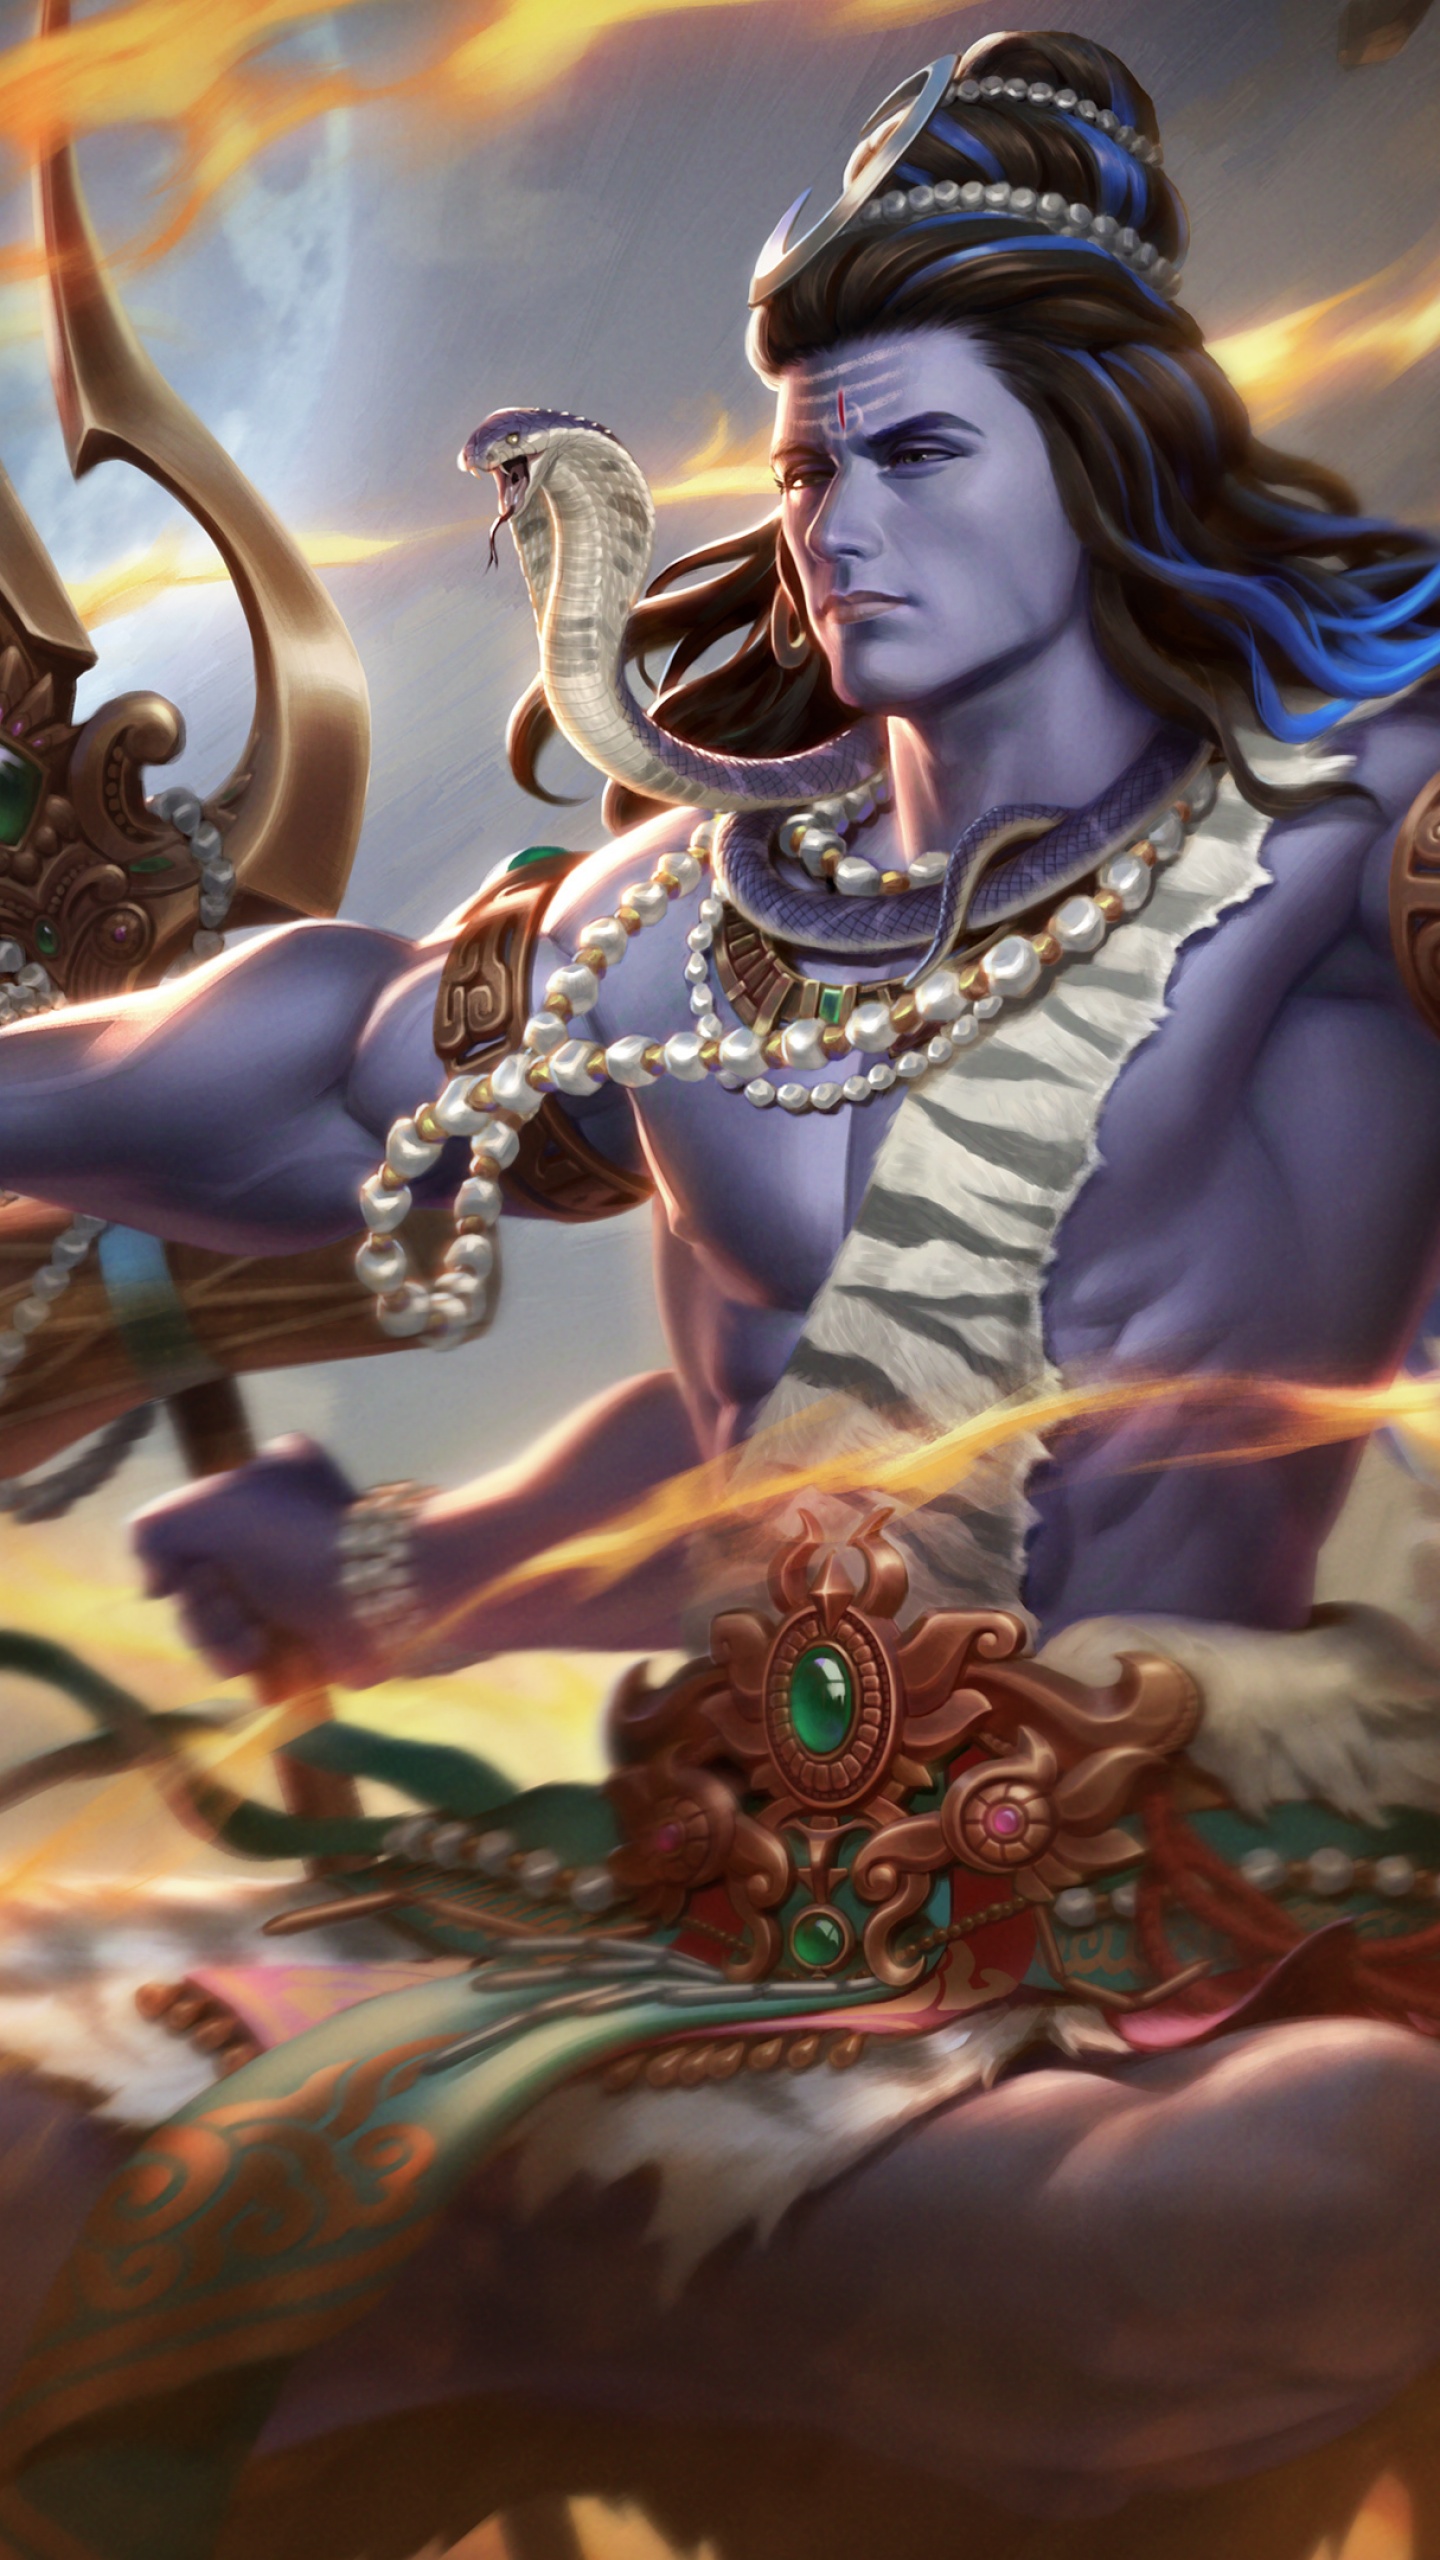 Lord Shiva Wallpaper 4K, The Destroyer, Smite, Games, #7301